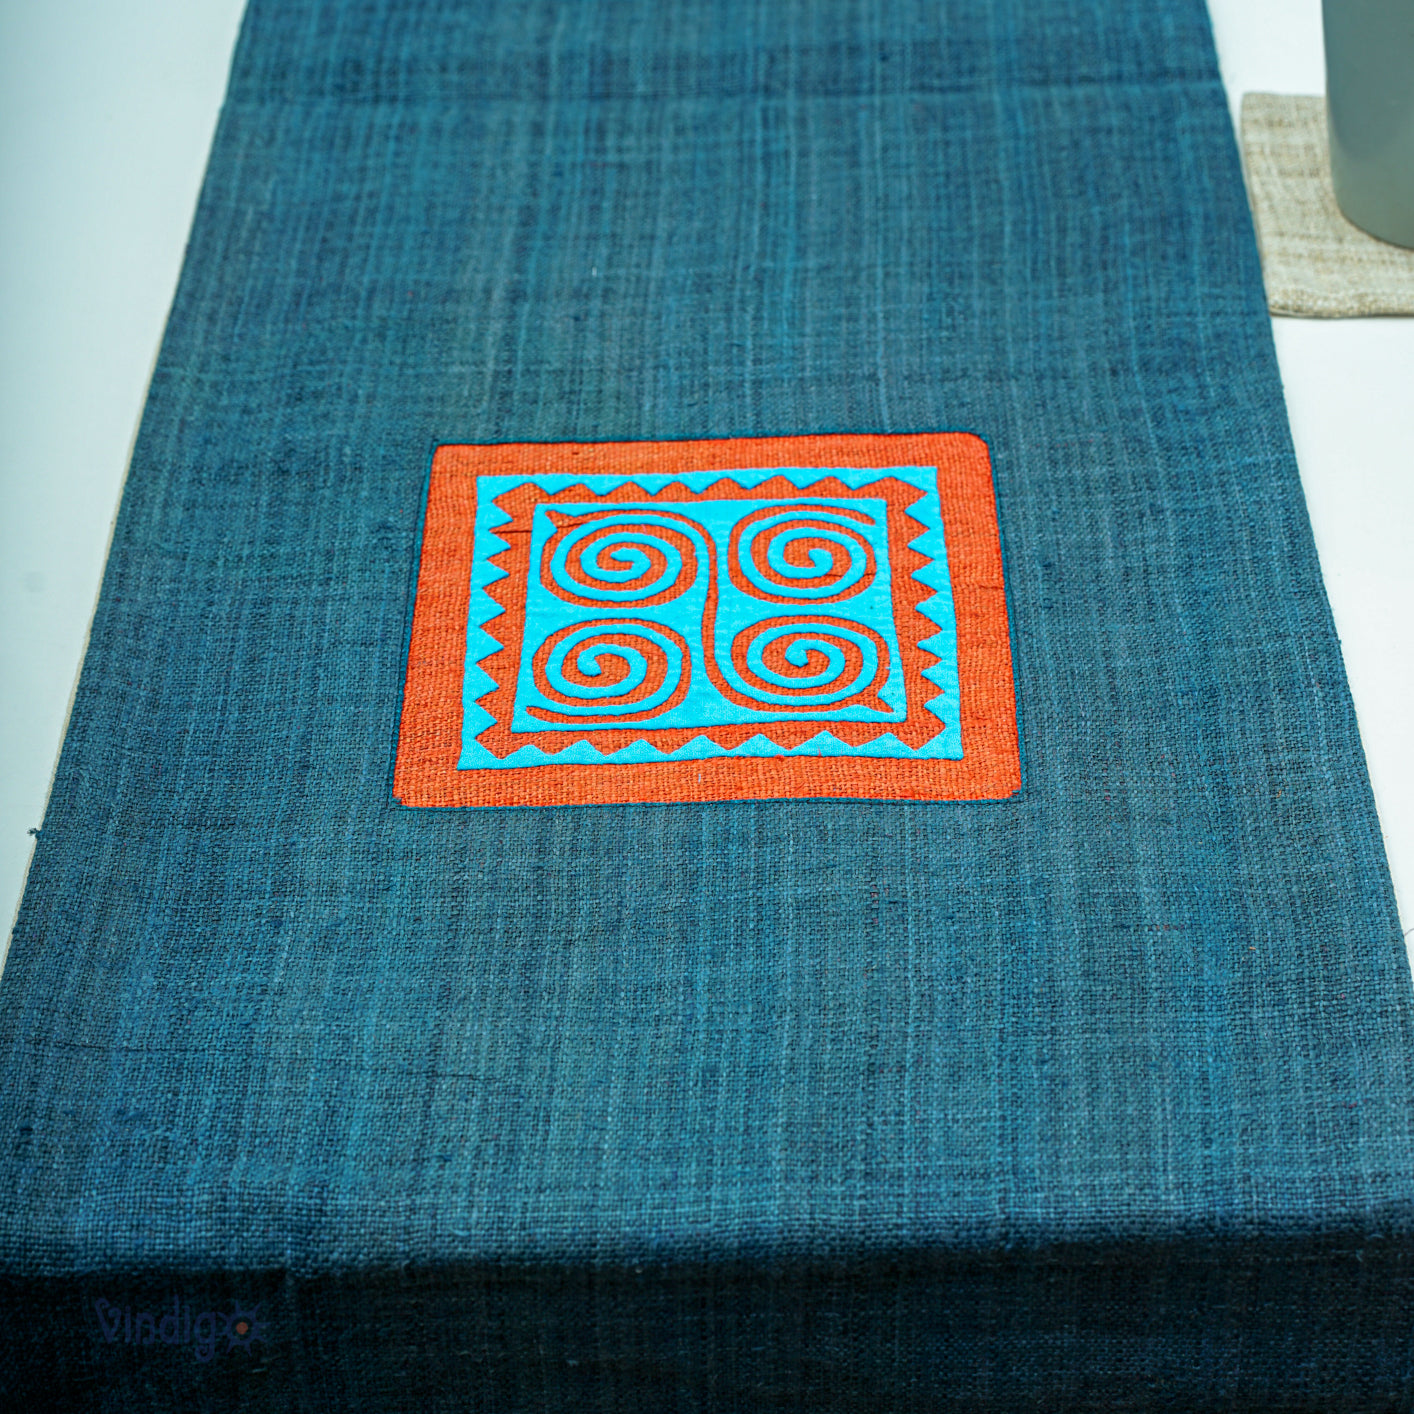 Indigo Blue Hemp Table Runner, hand-embroidered patch, hemp stripes in different colors